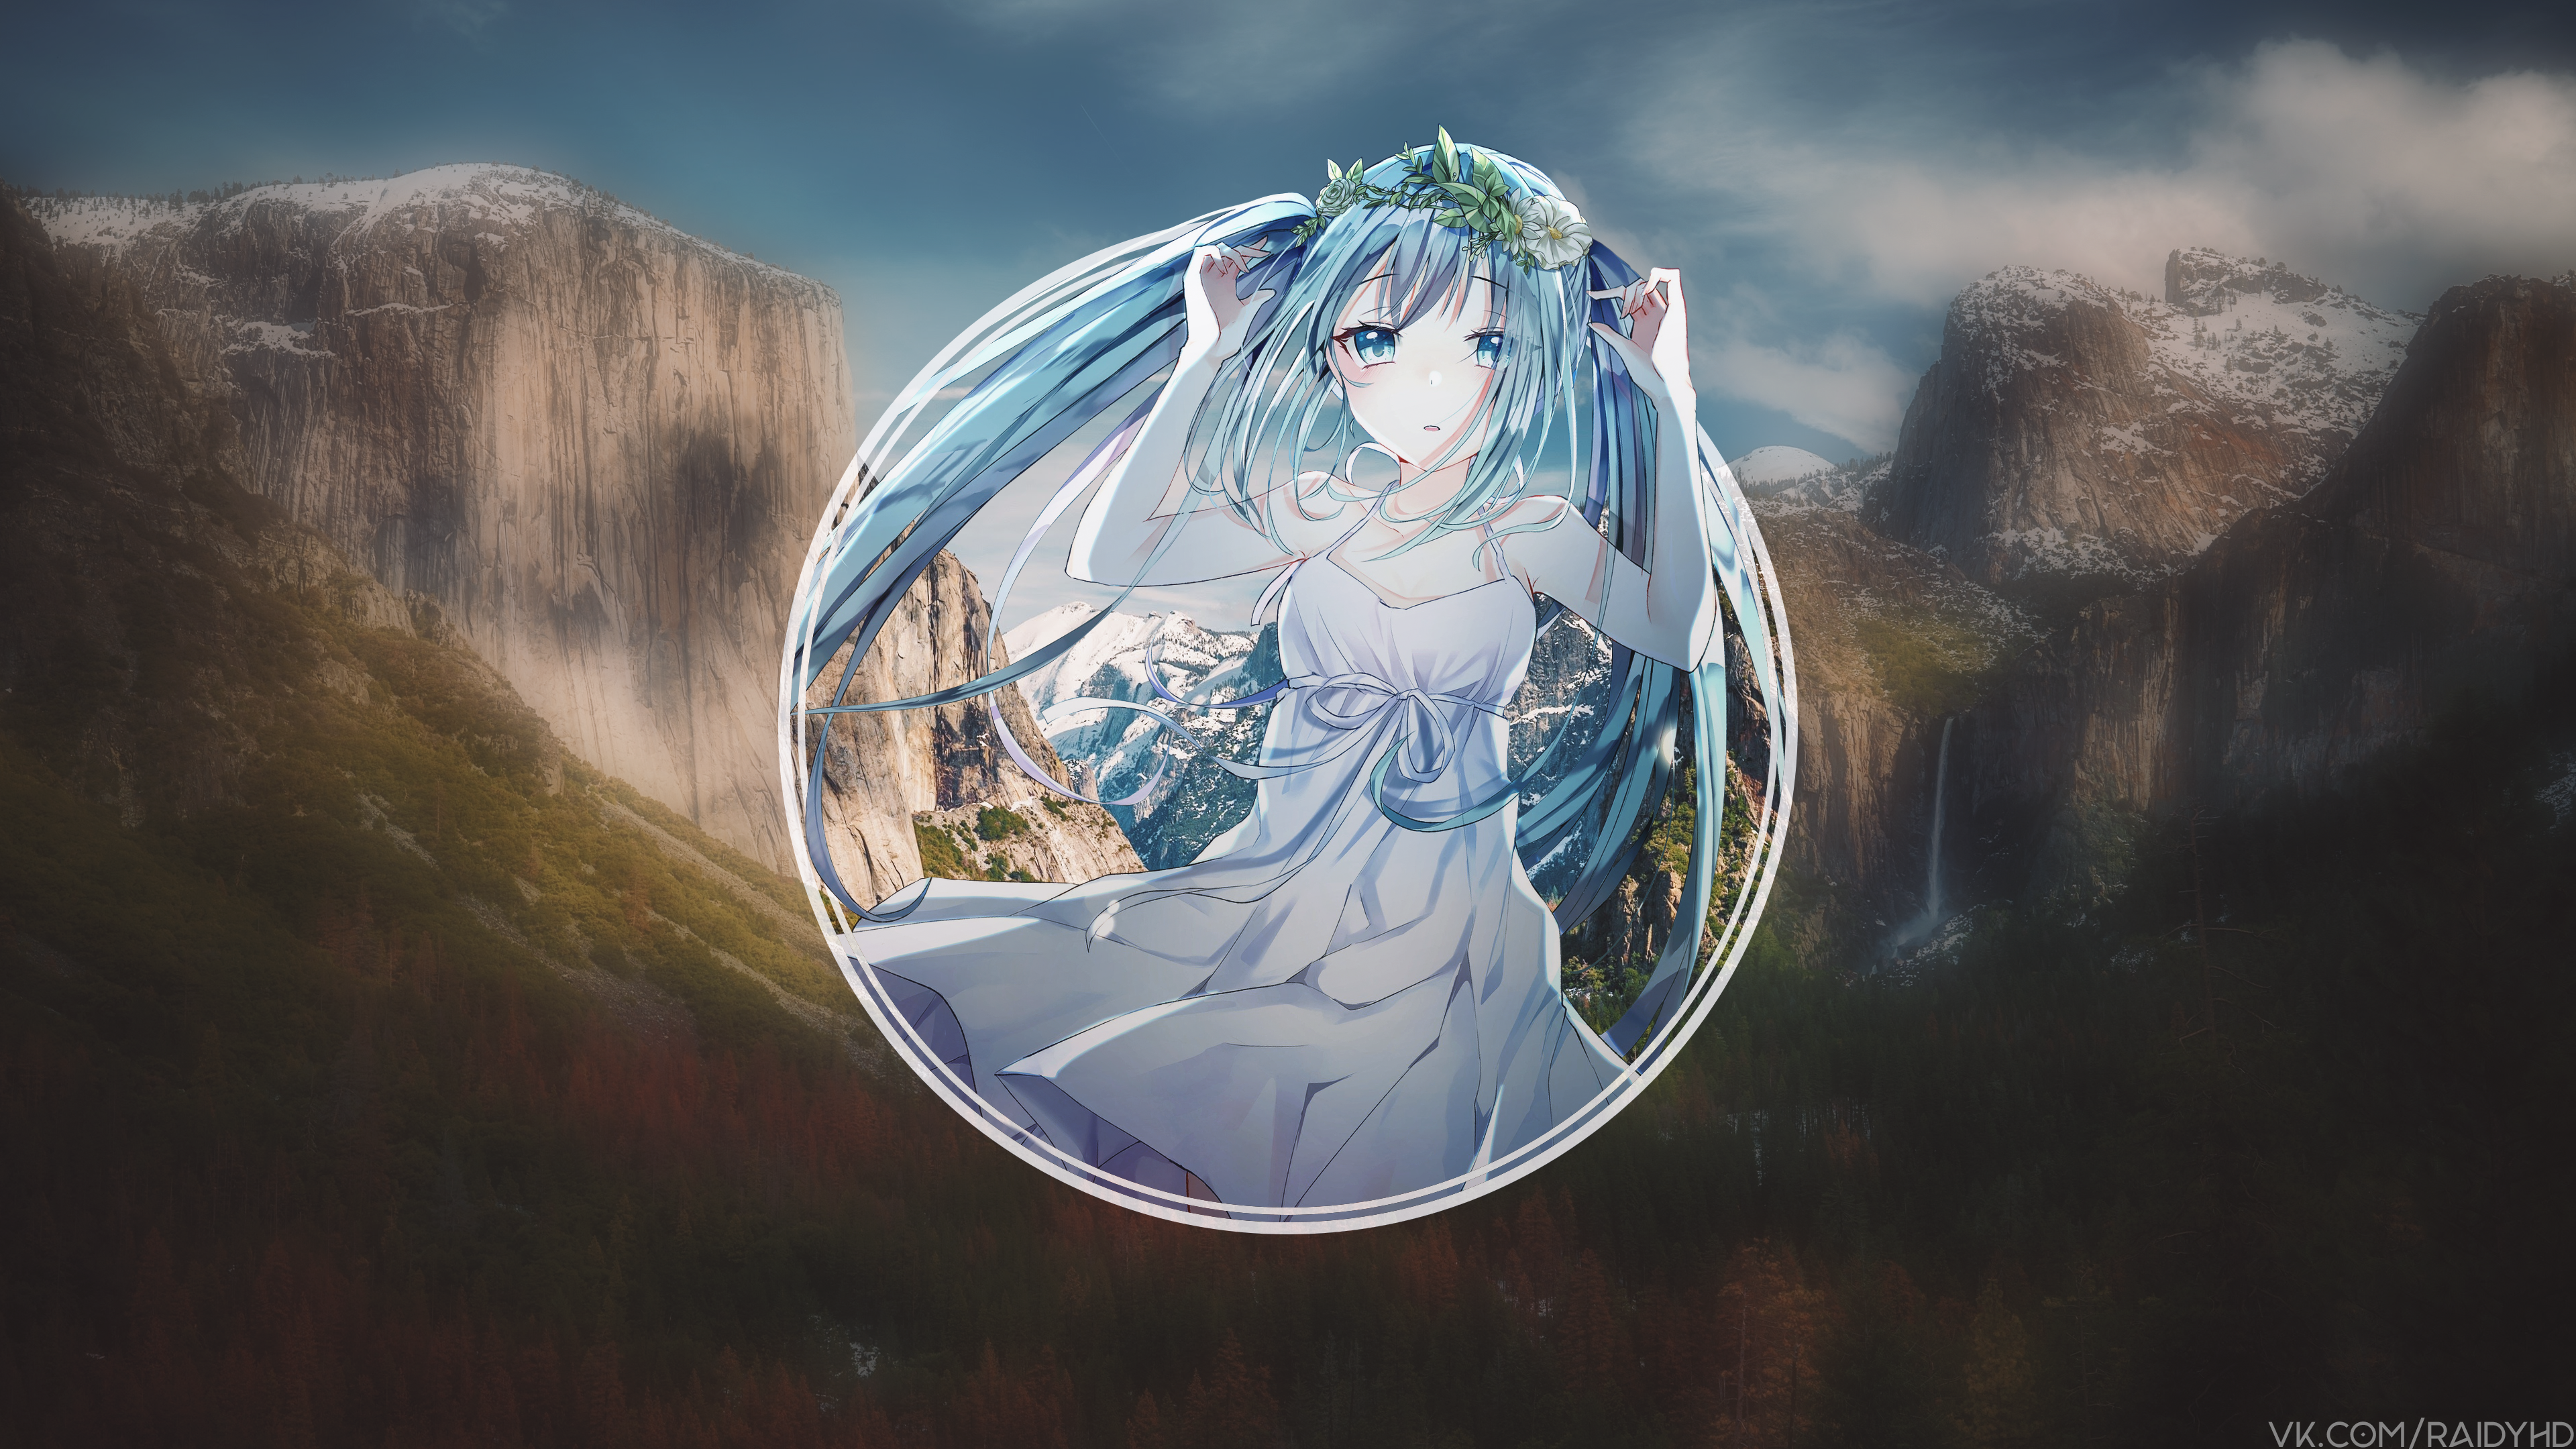 Anime 3840x2160 anime anime girls picture-in-picture Hatsune Miku